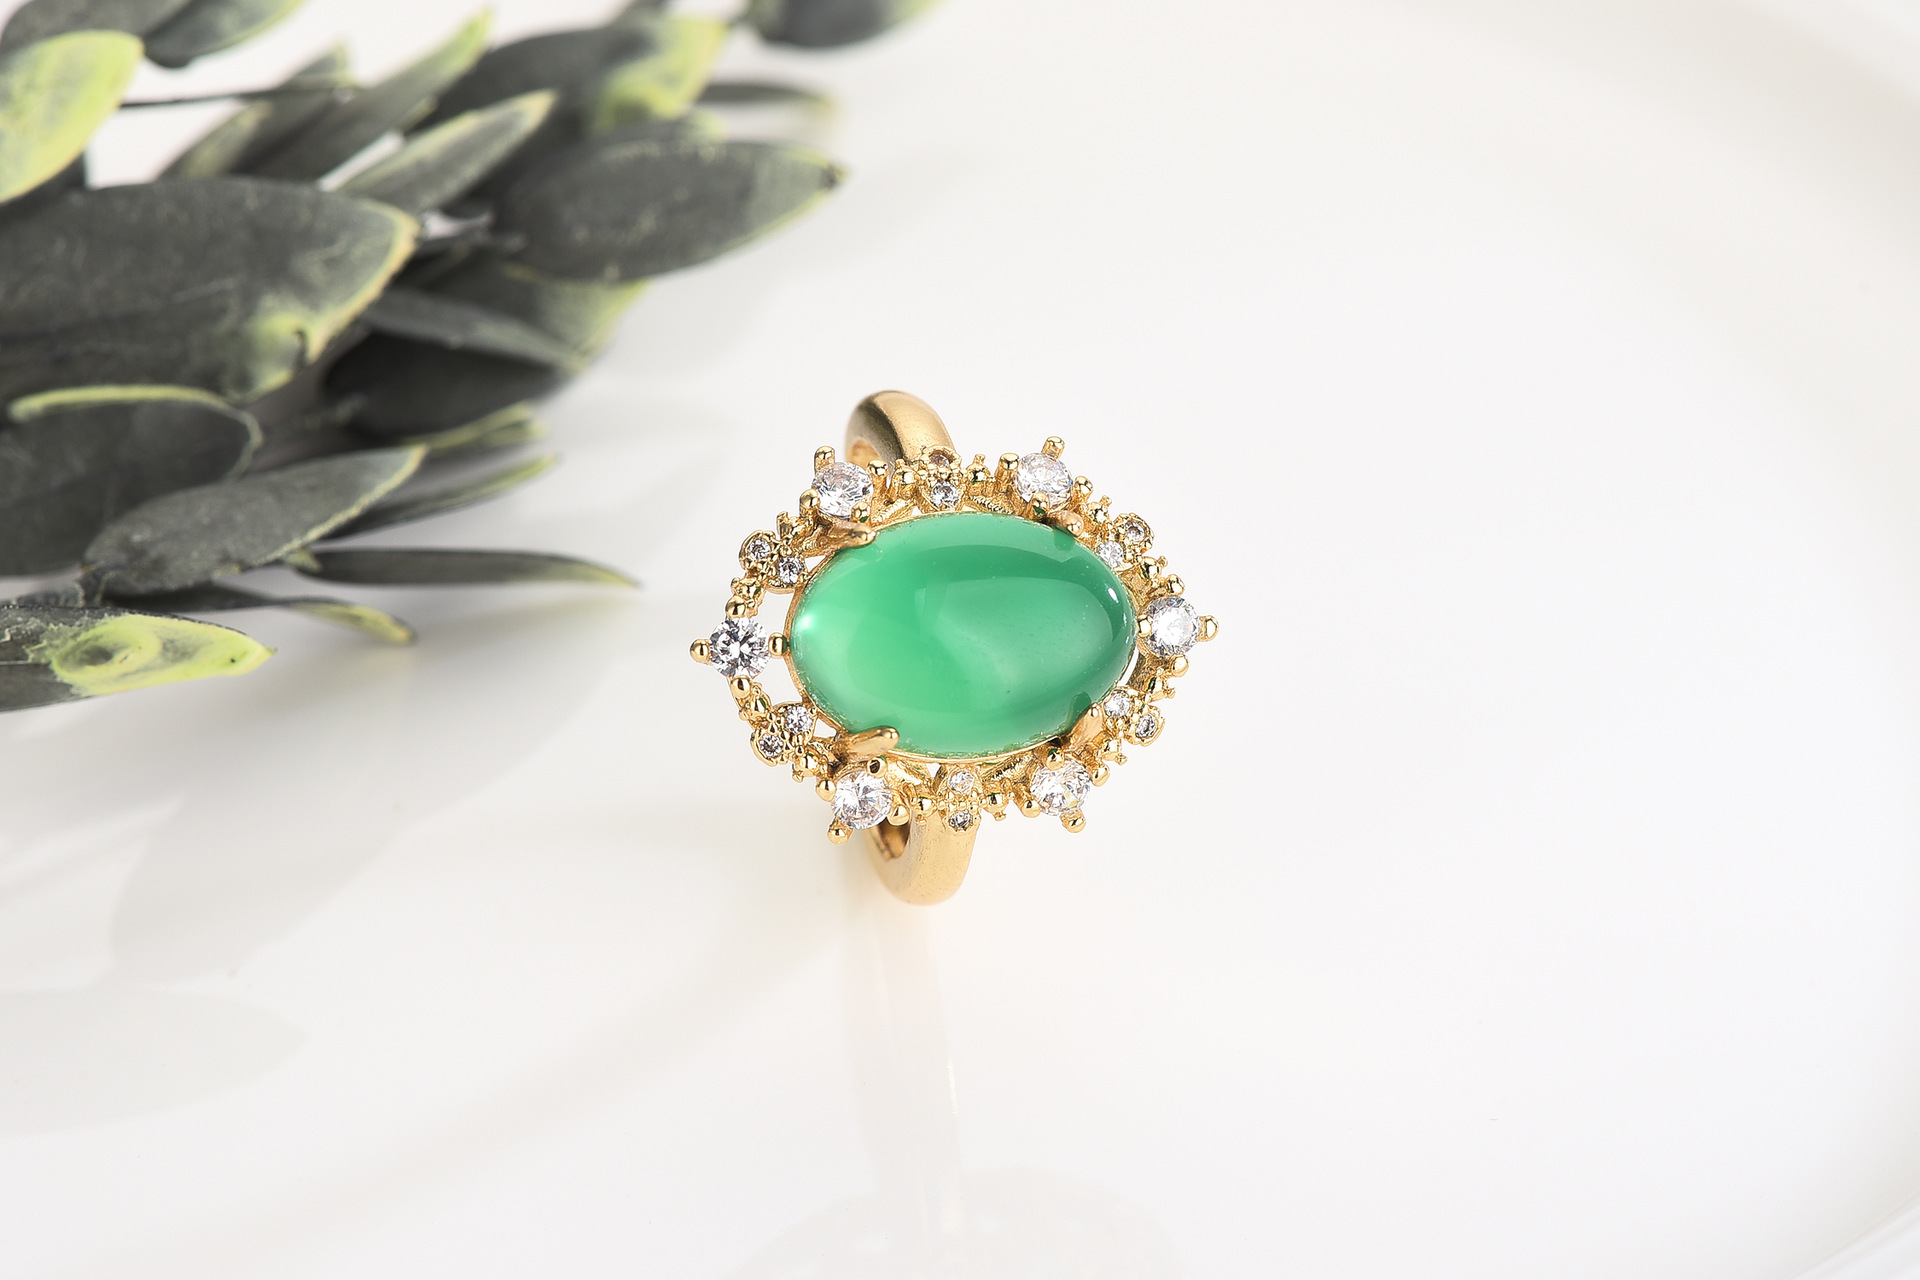 10x14mm ring (including chrysoprase) with adjustable opening